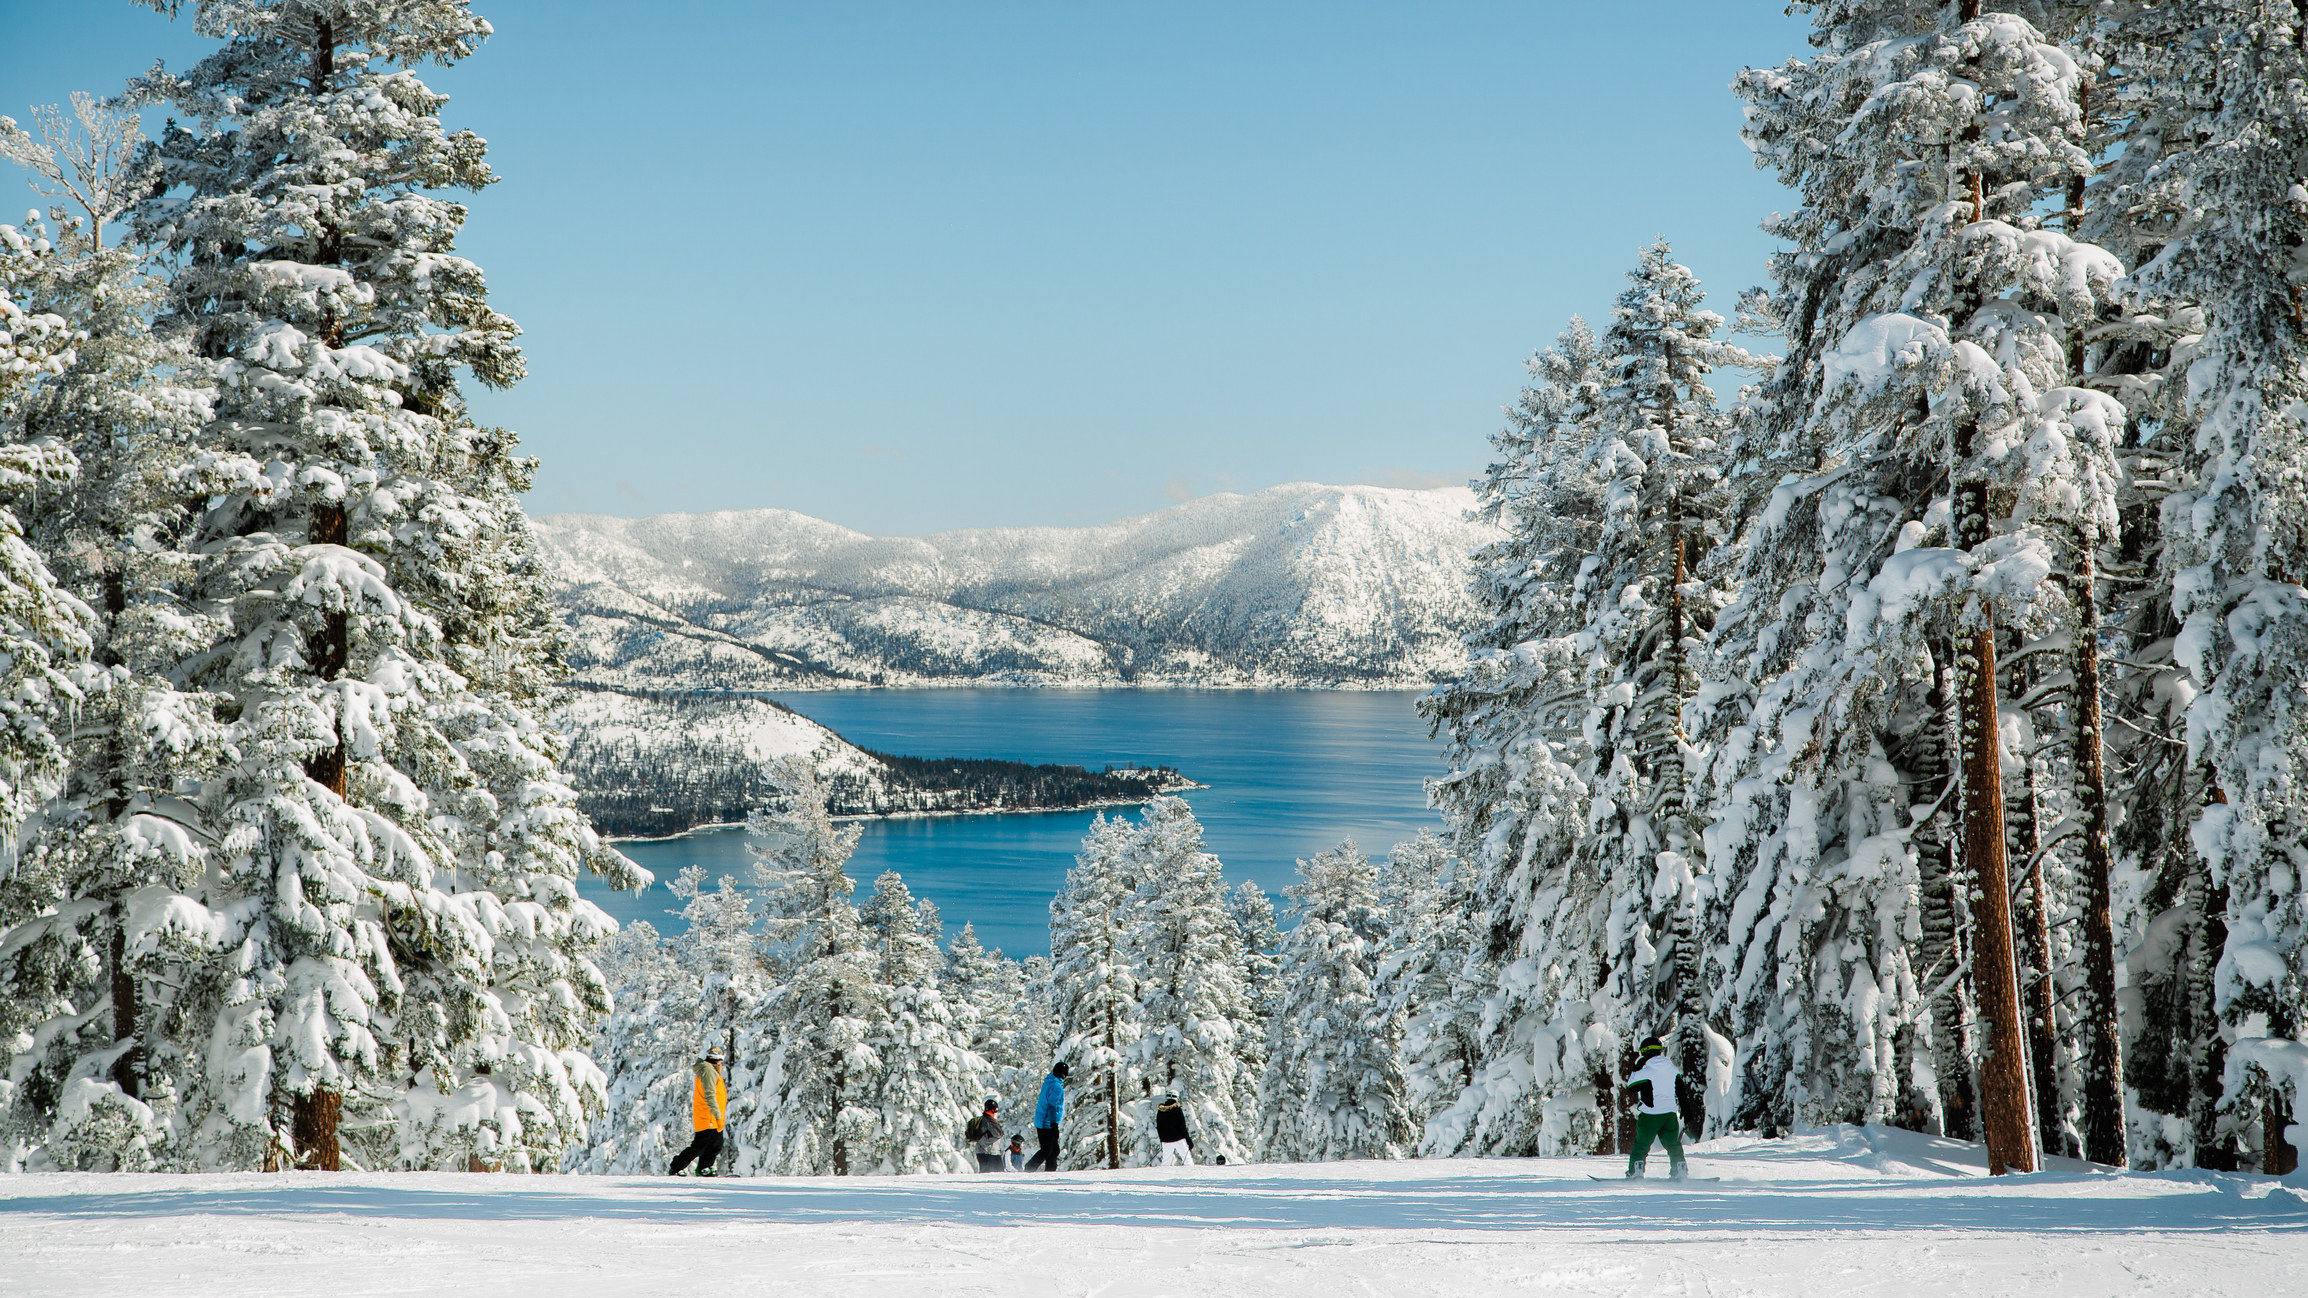 People skiing on top of a mountain with view of Lake Tahoe on a snowy winter day.